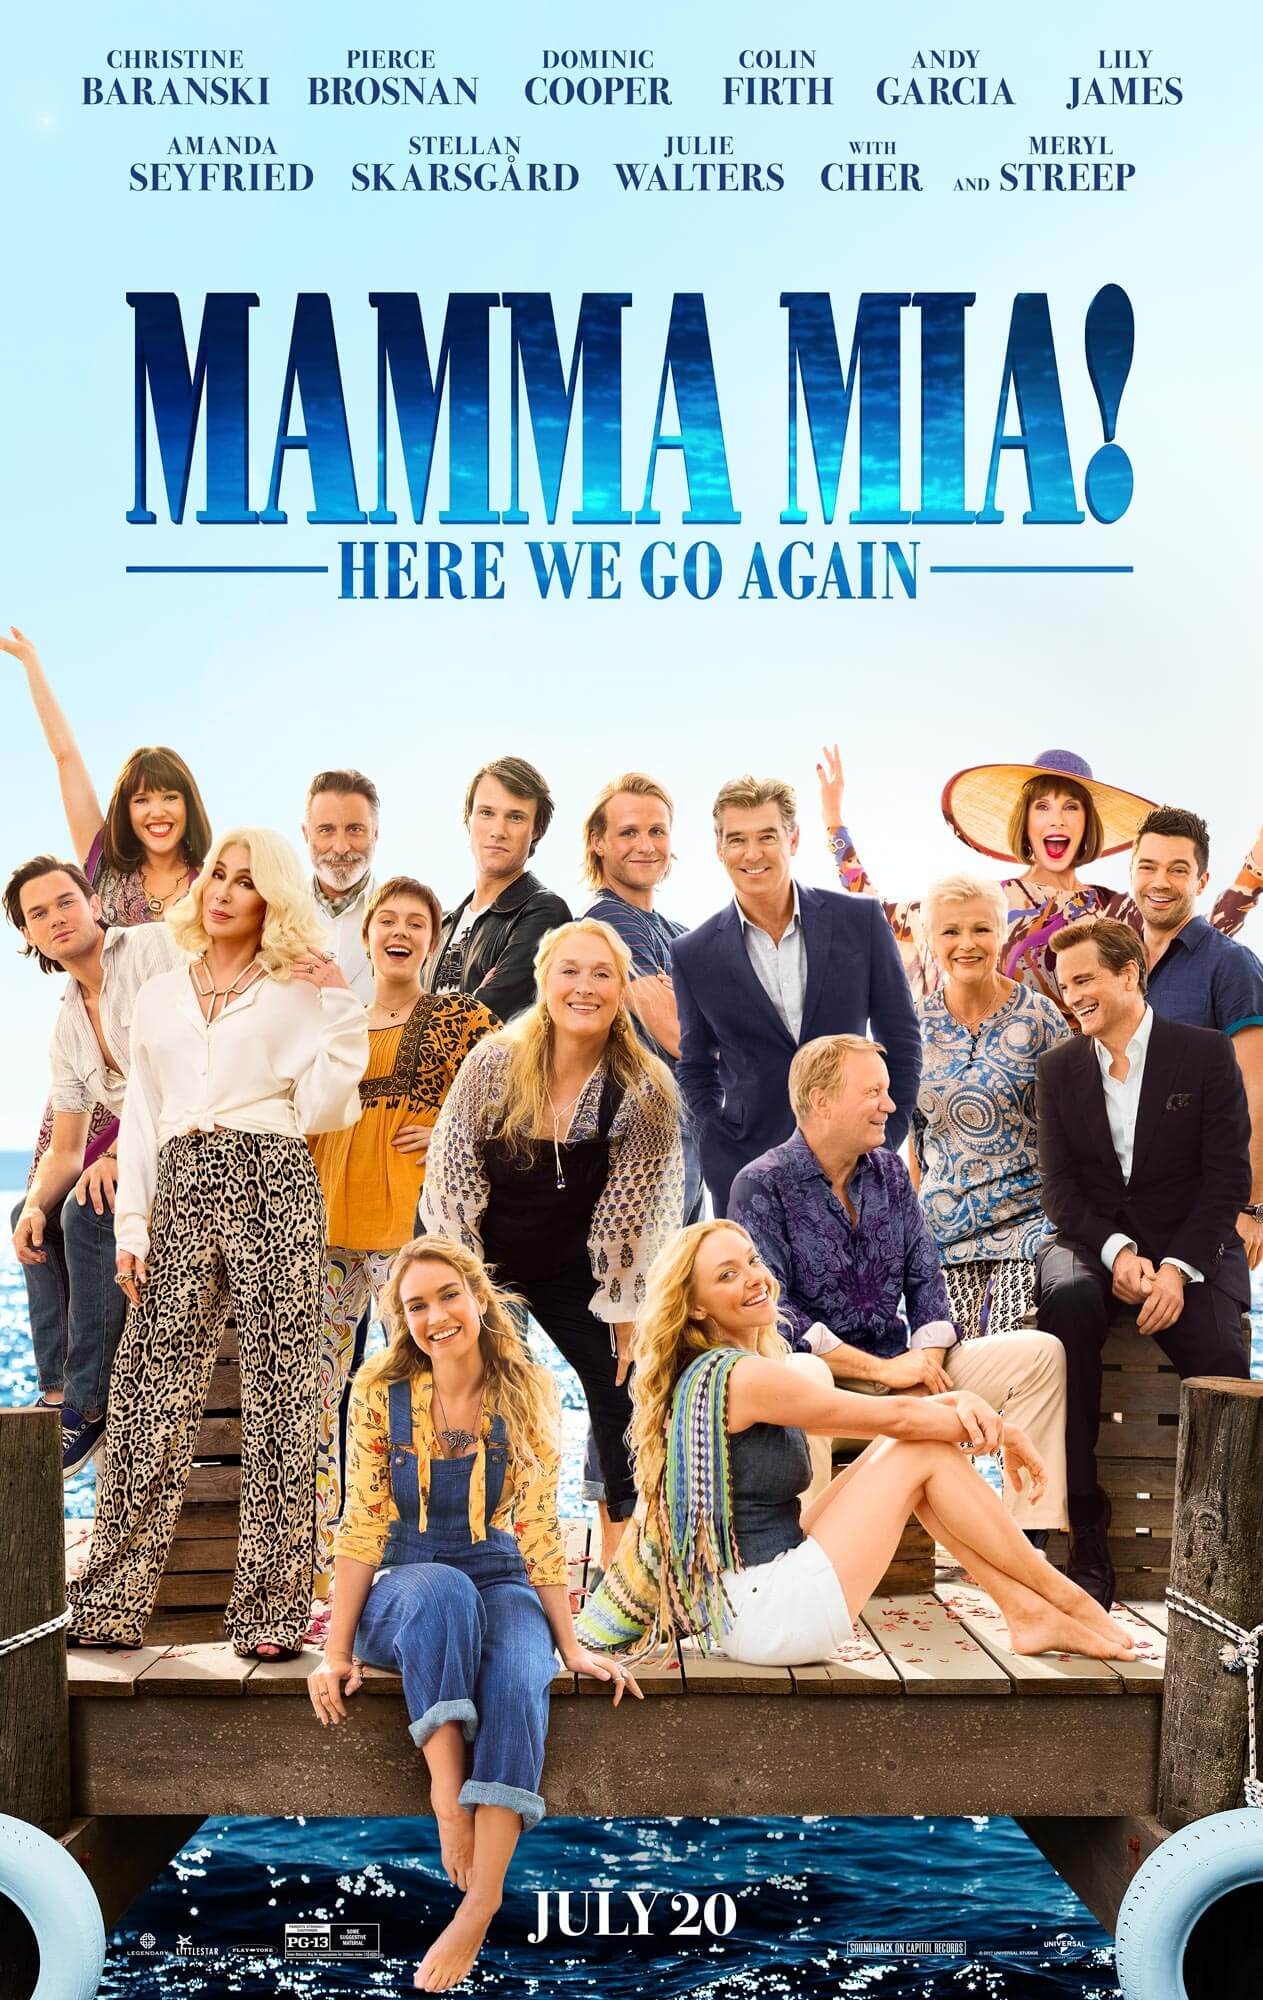 Mamma Mia! Here We Go Again Poster. In Theaters Now